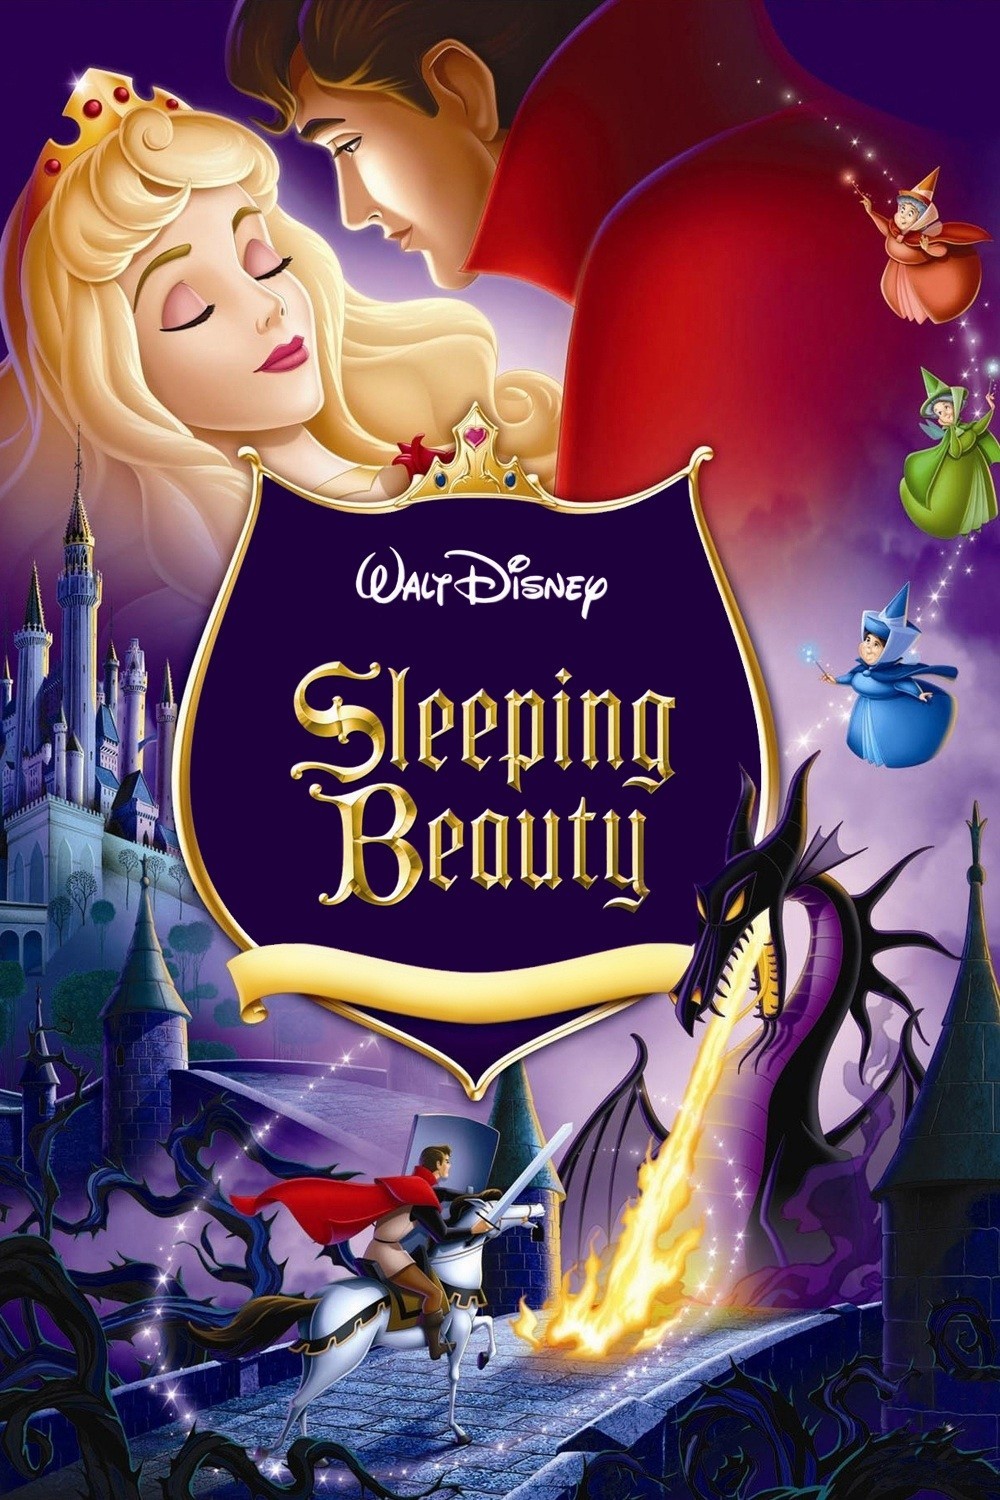 http://danielslackdsu.blogspot.co.uk/2016/11/sleeping-beauty-once-upon-this-dream.html